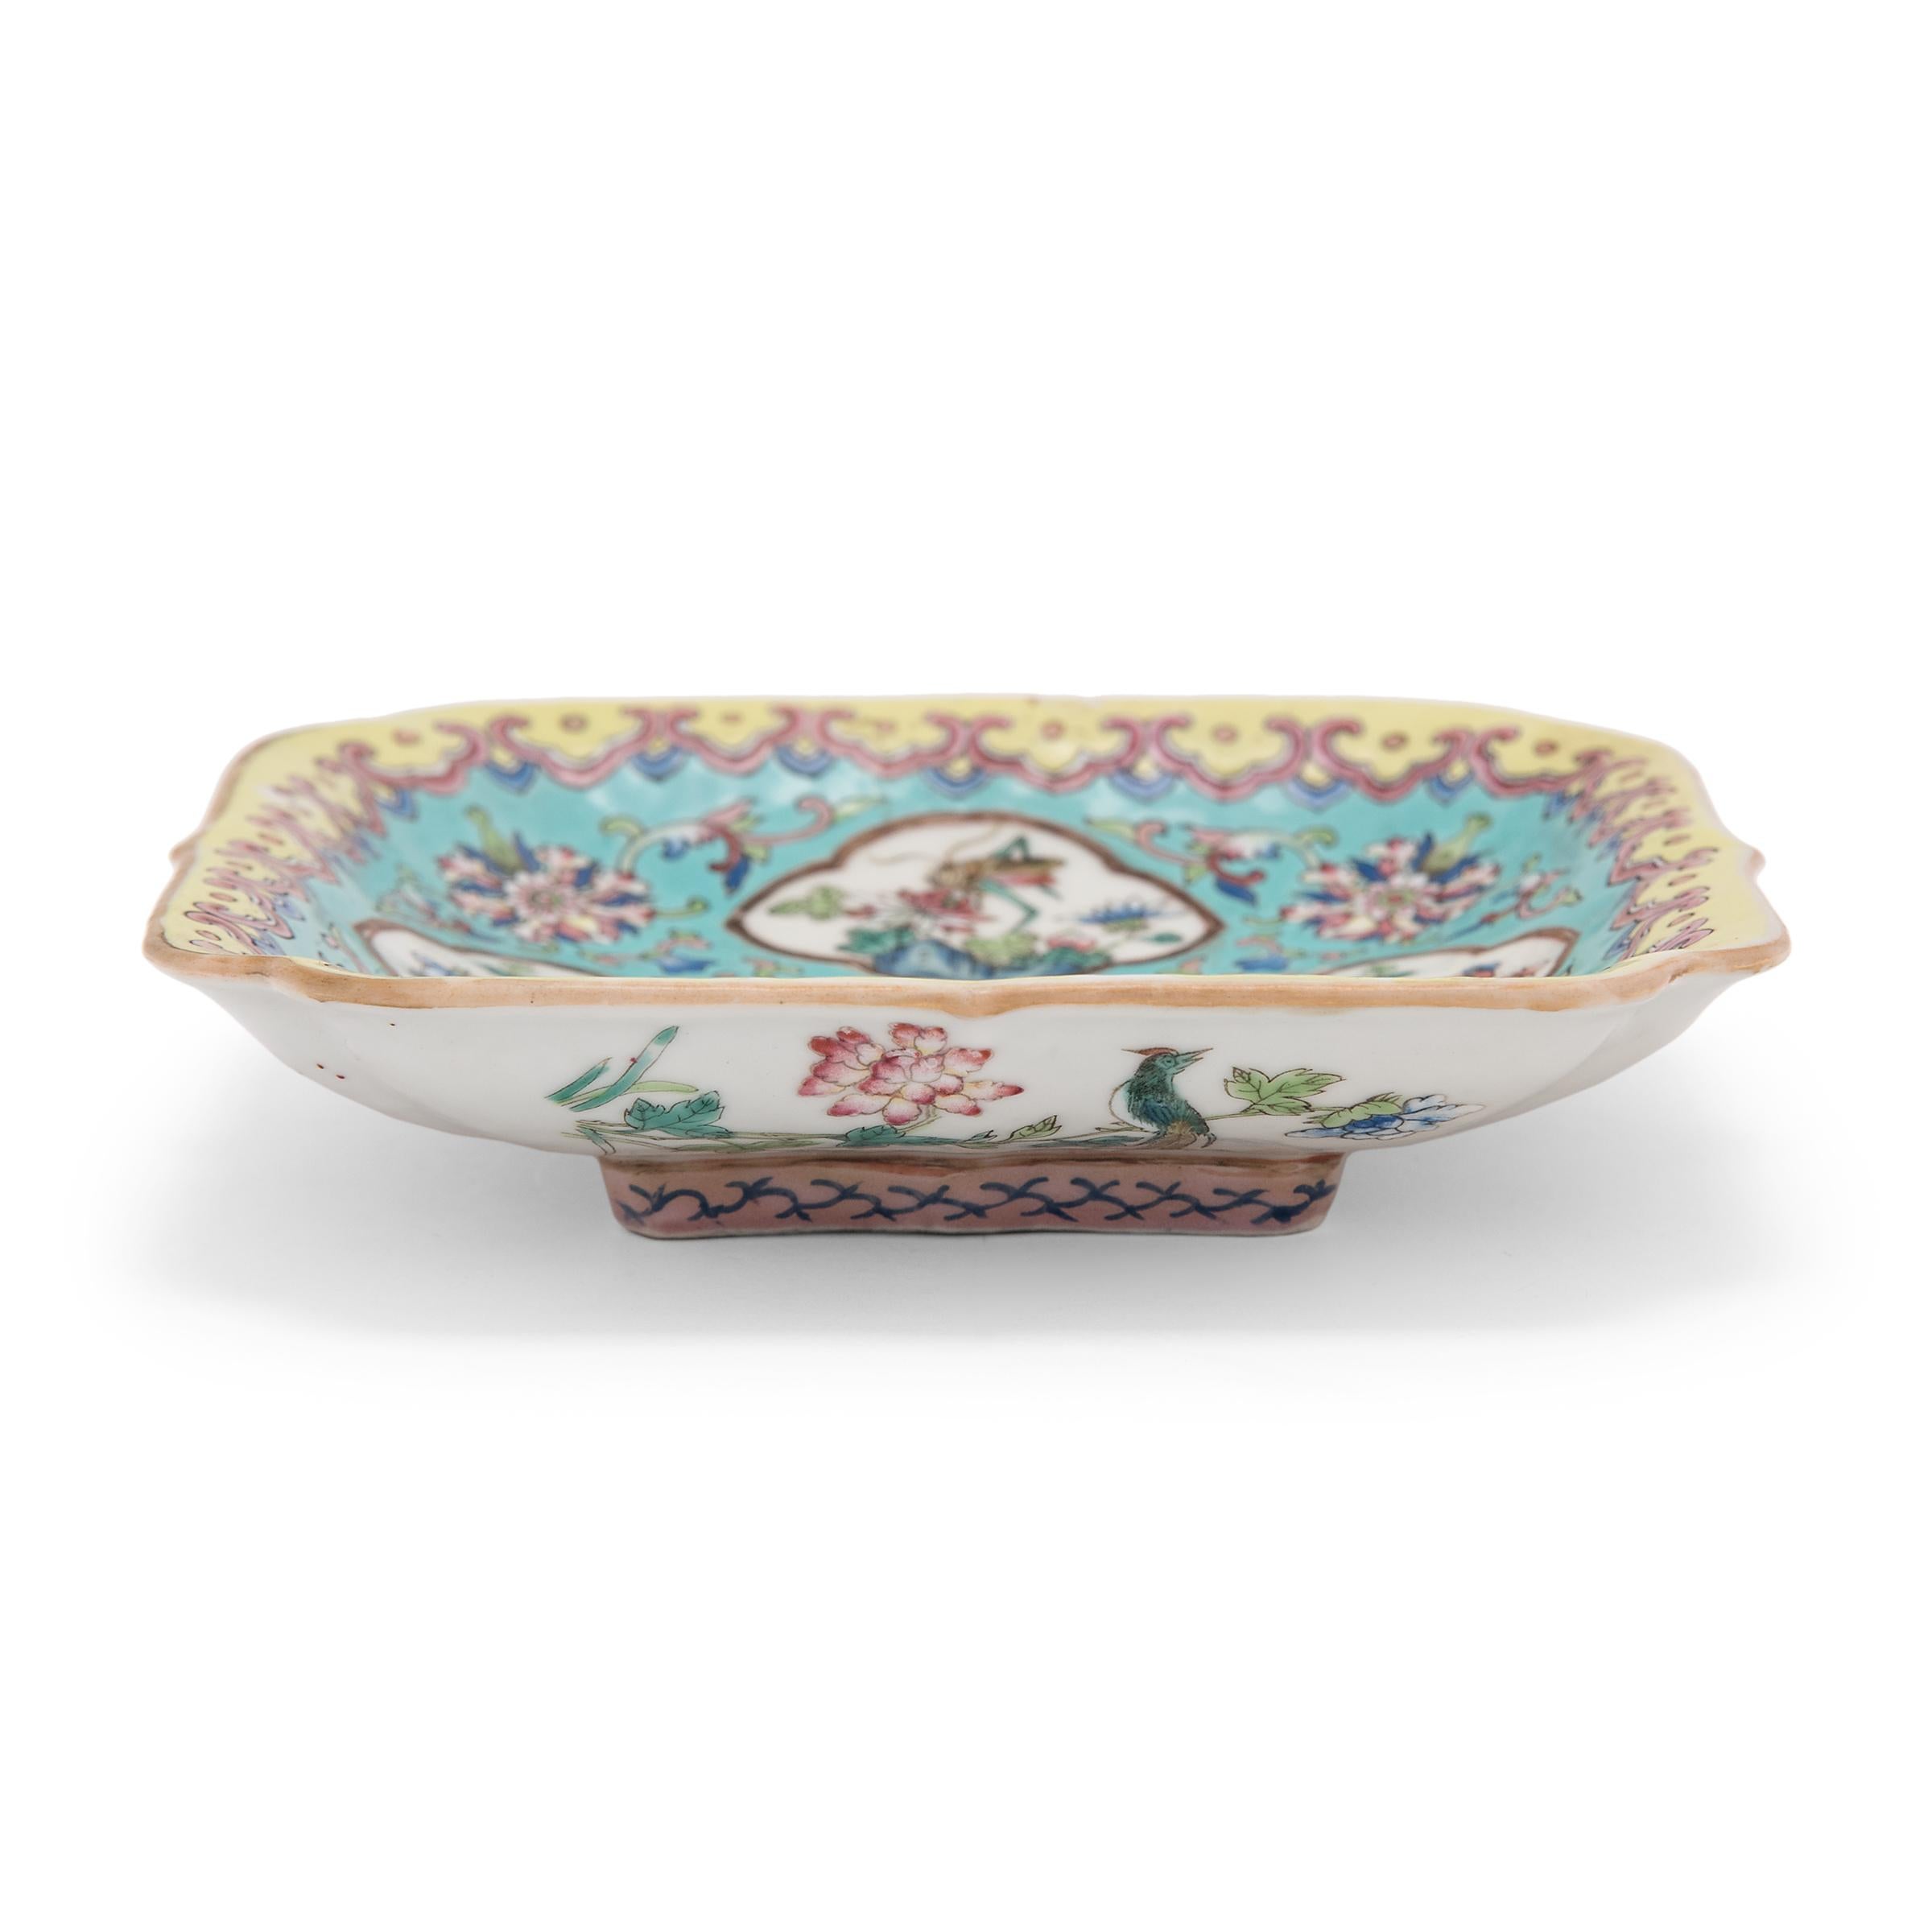 20th Century Chinese Famille Rose Square Dish, c. 1900